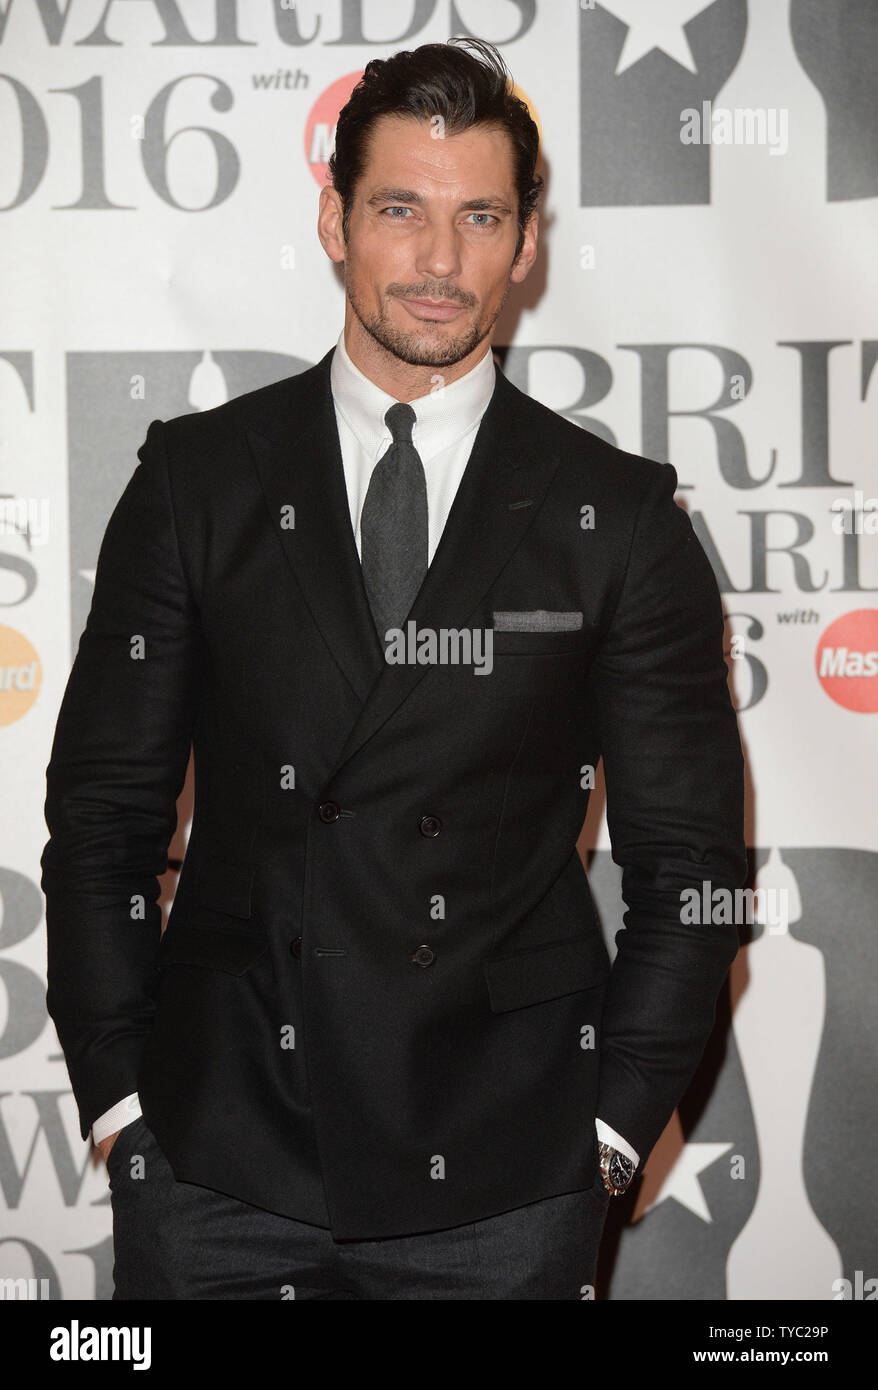 British actor Luke Evans attends the Brit Awards at O2 Arena in London ...